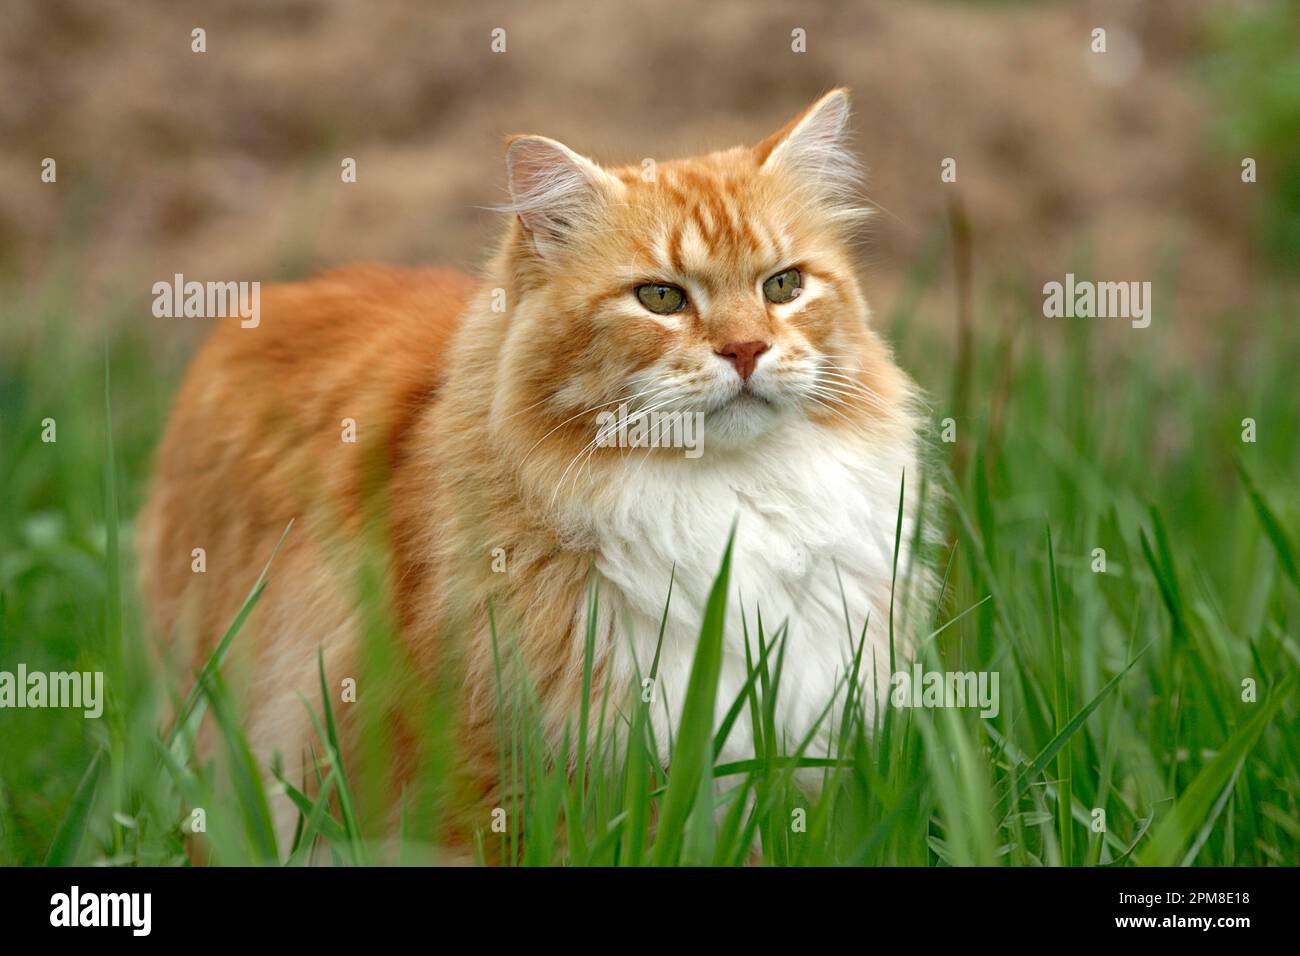 Tomcat Ginger tabby, poitrine blanche debout dans l'herbe haute, chasse Banque D'Images